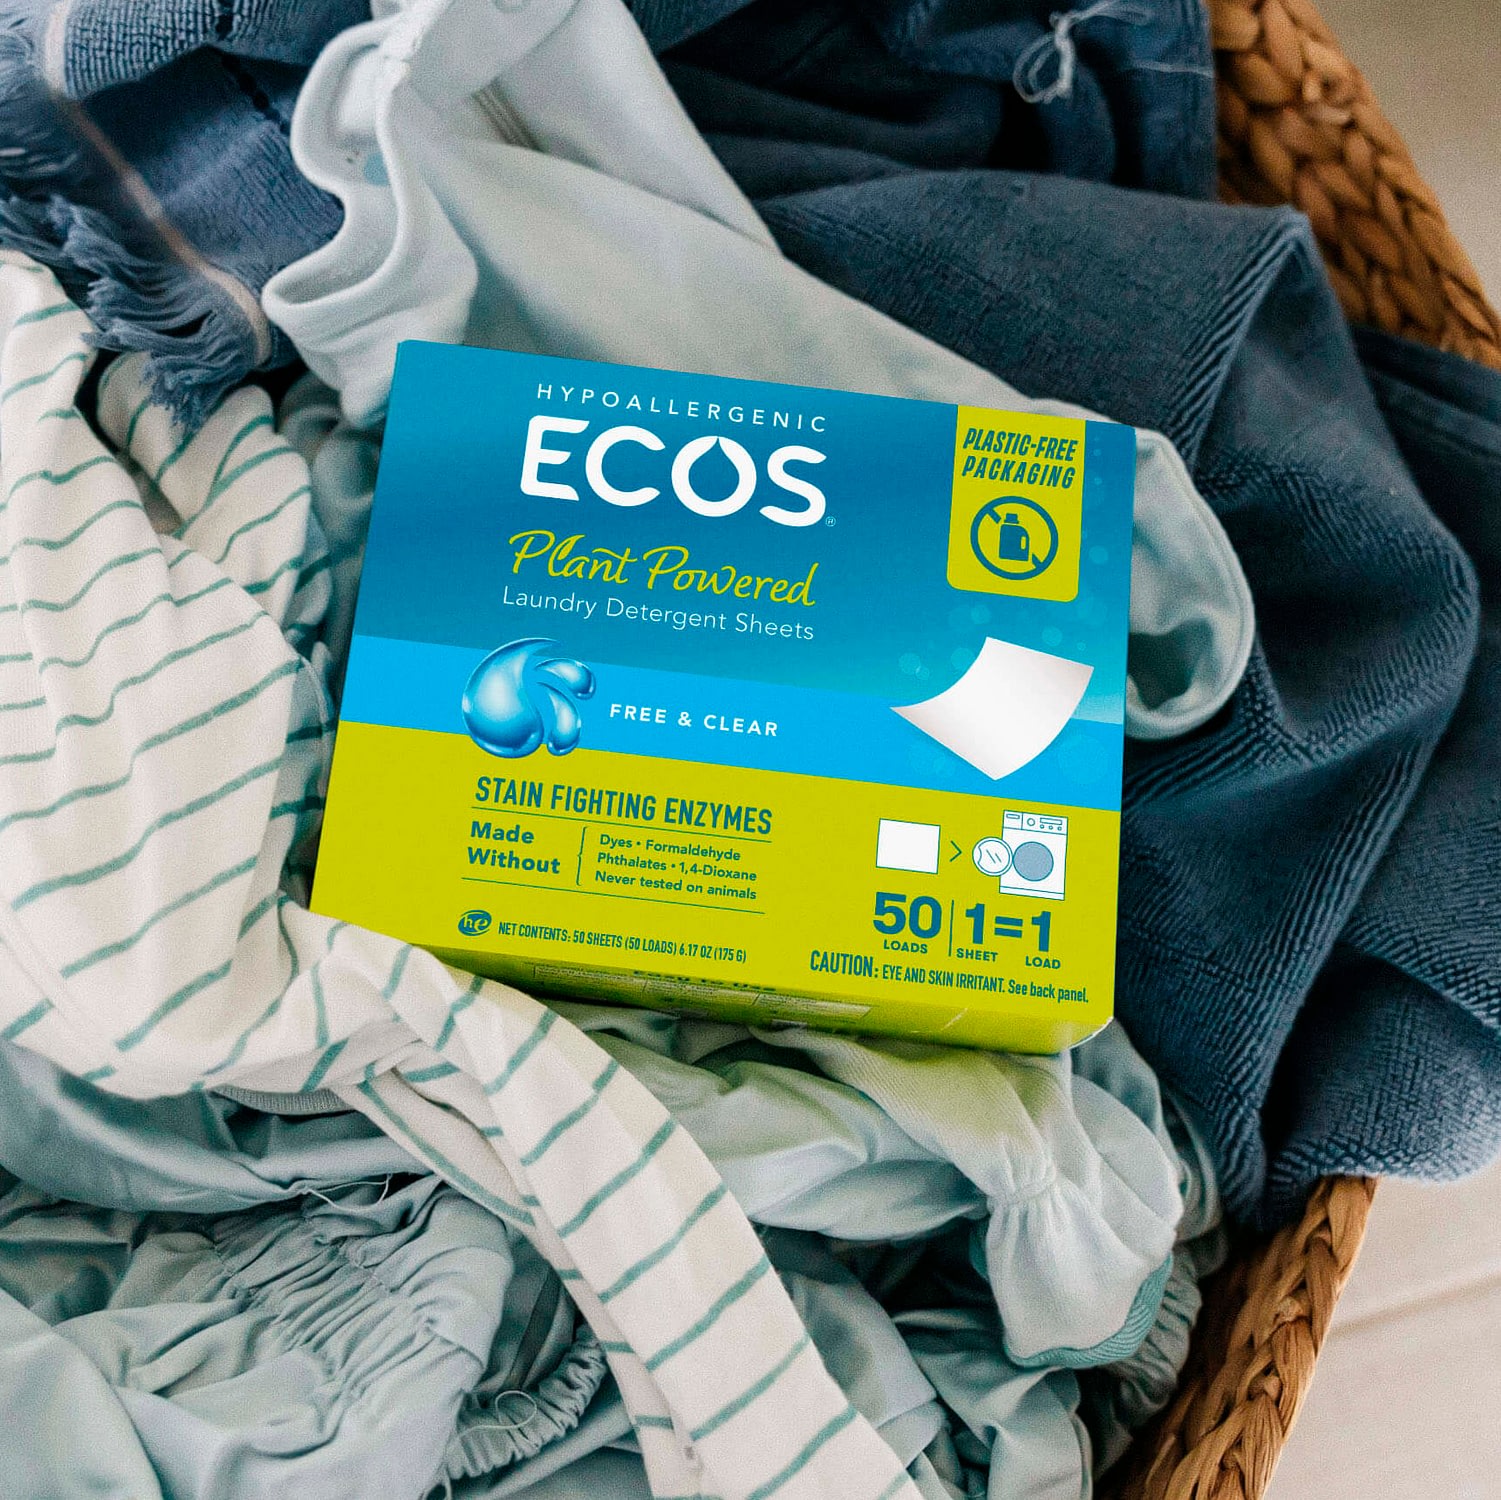 ECOS laundry detergent sheets in basket of laundry